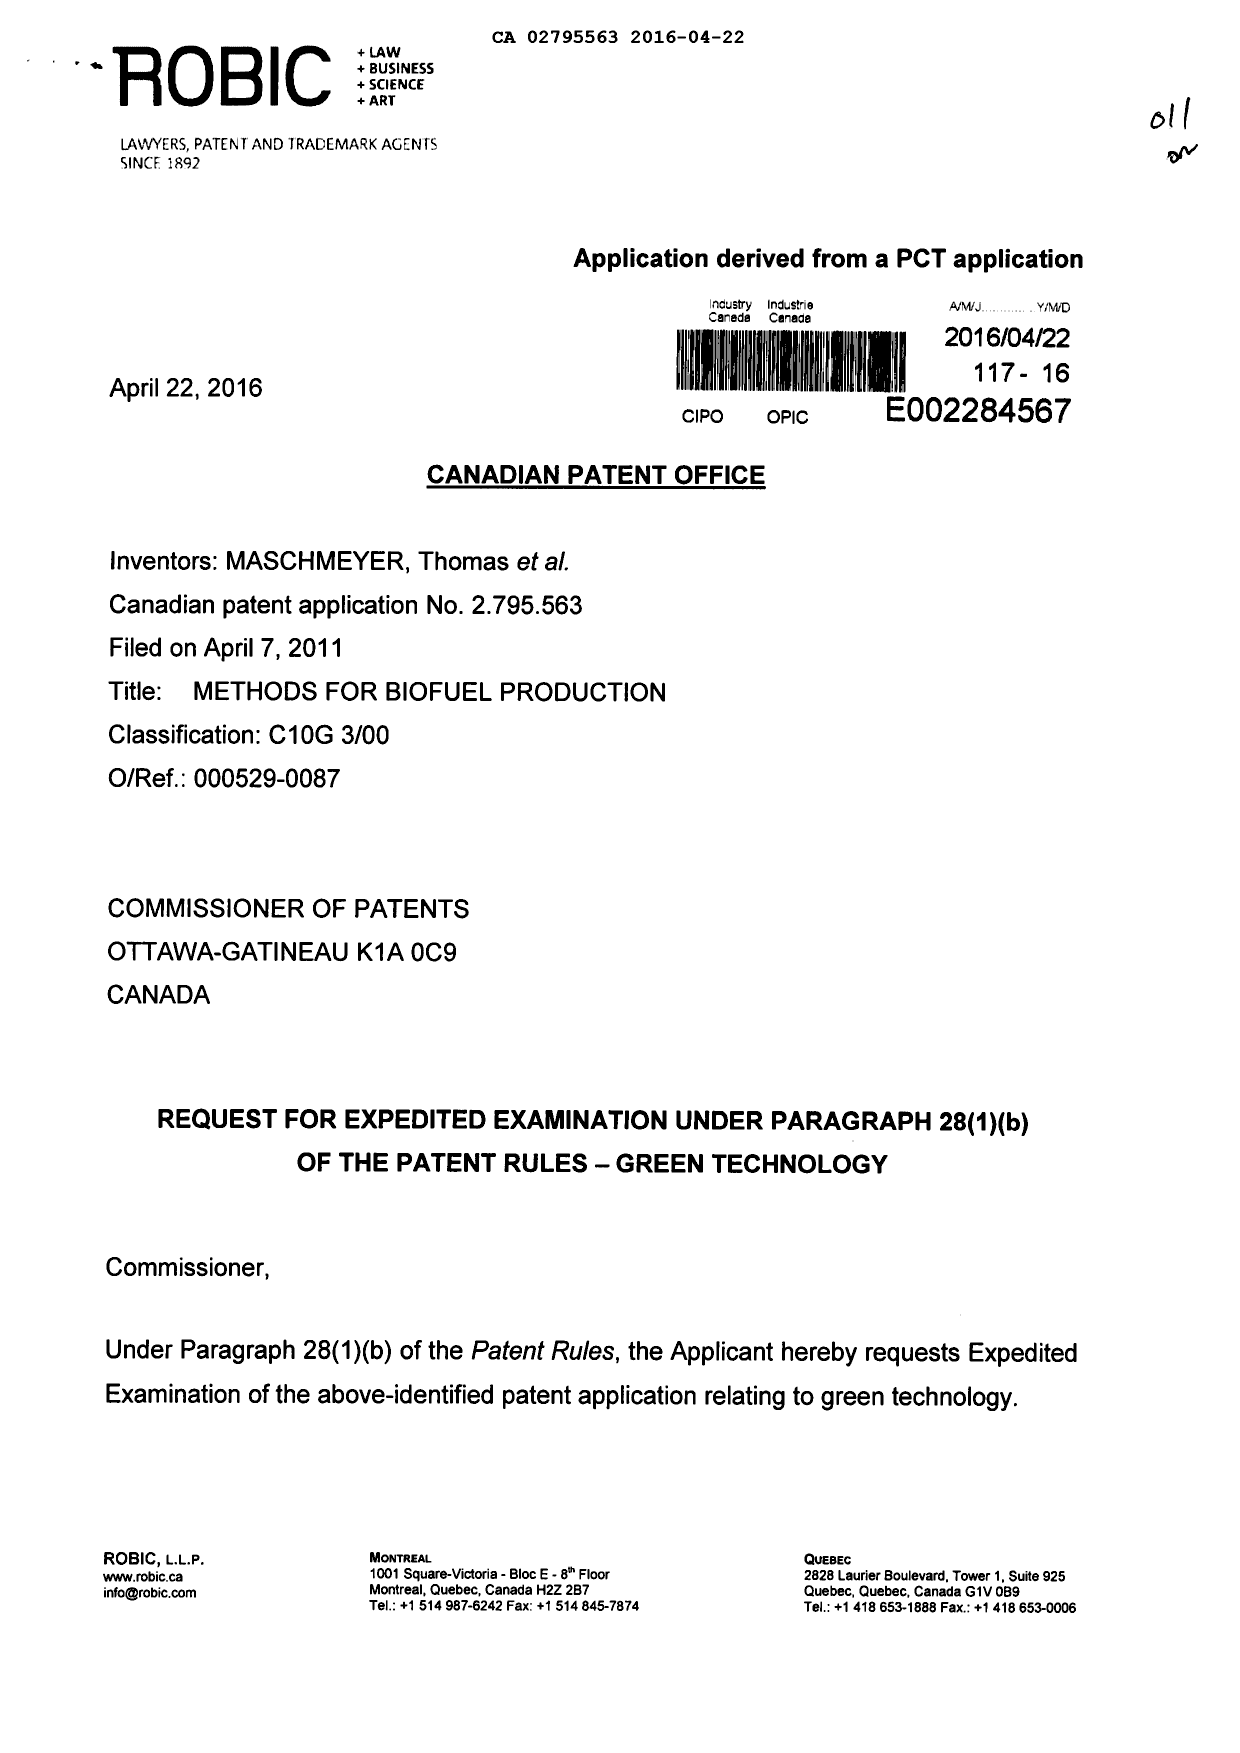 Canadian Patent Document 2795563. Special Order 20160422. Image 1 of 3